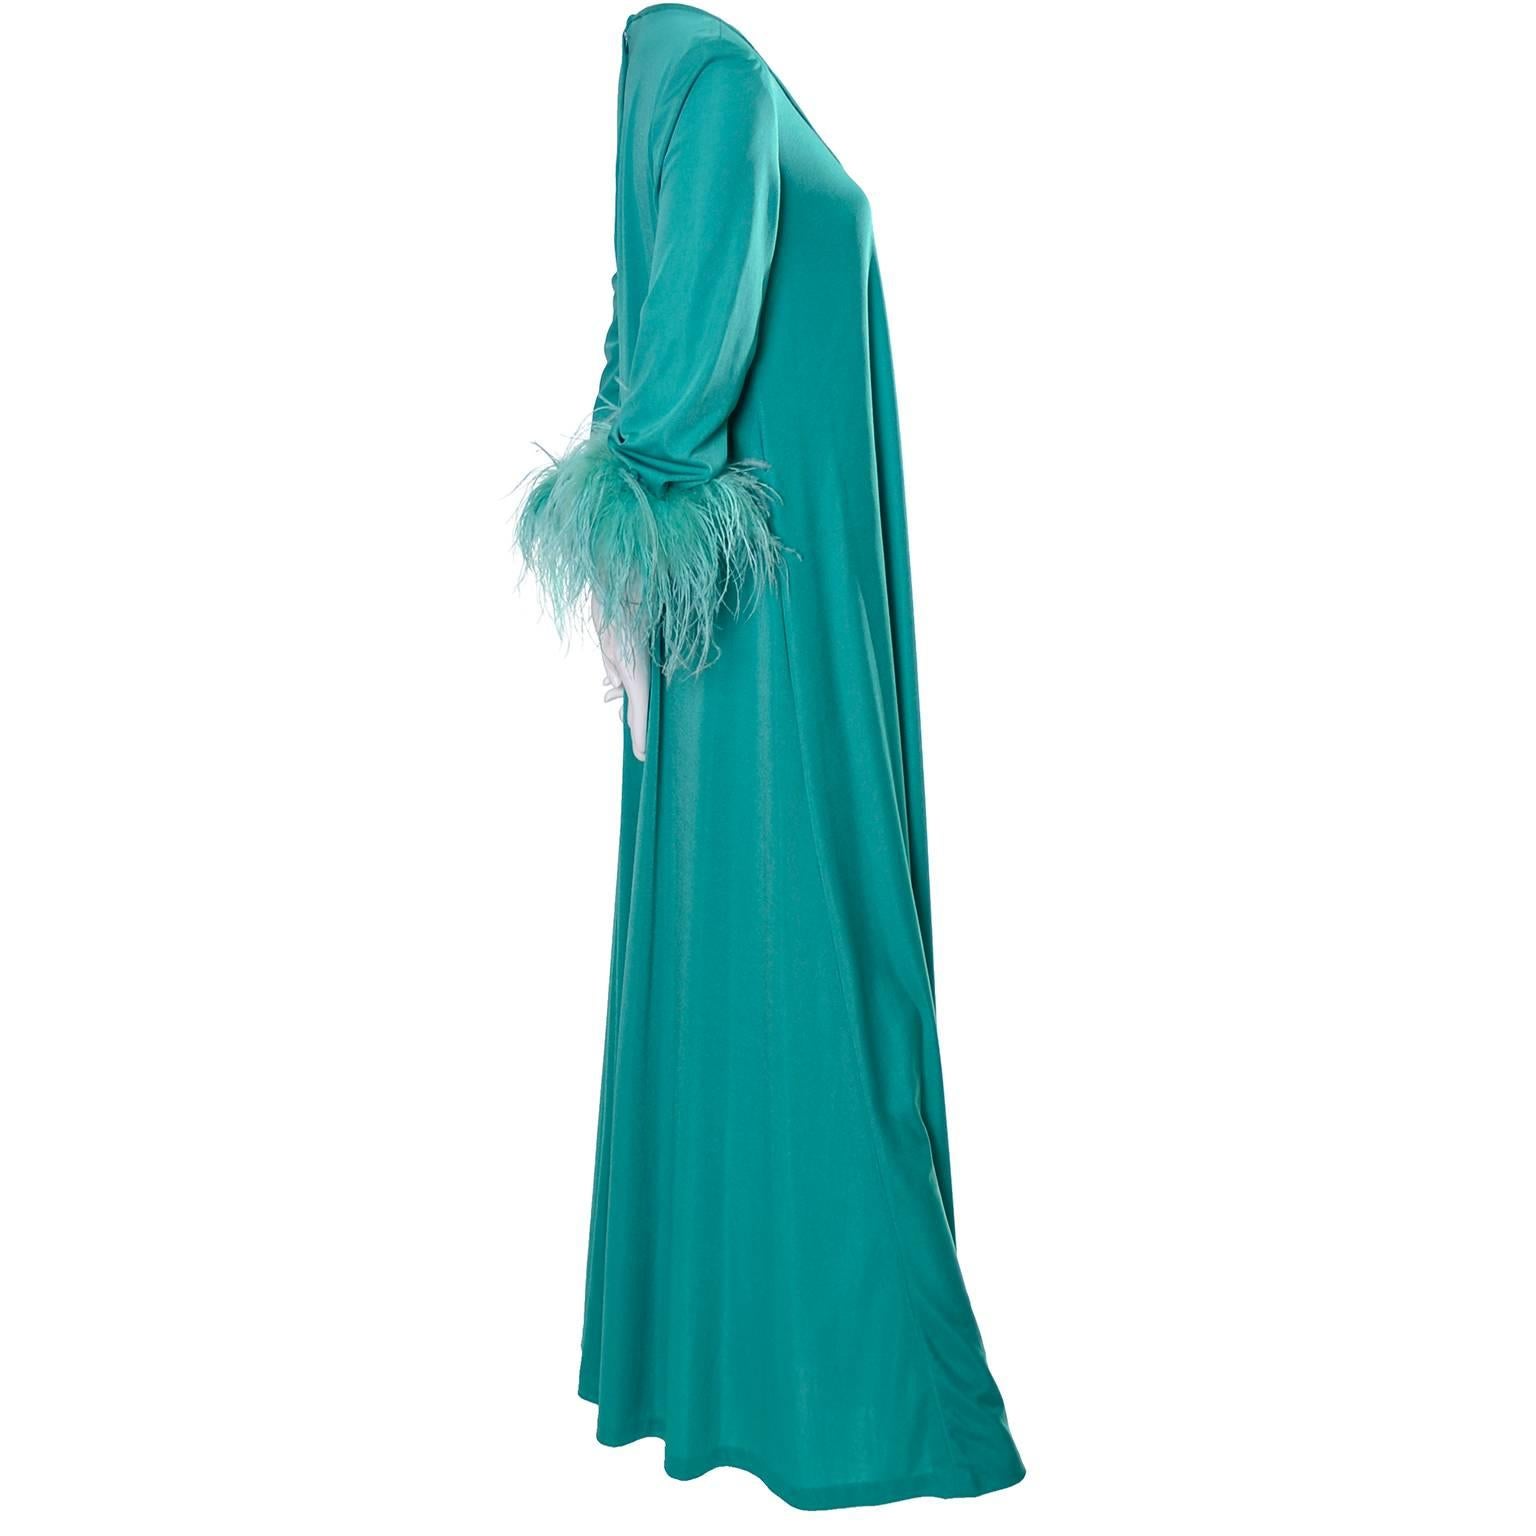 We love these glamorous gowns from Lilli Diamond. This green jersey maxi dress can be worn as a dress or a hostess outfit.  The dress has a low scoop neck, long sleeves with dyed green ostrich feather cuffs and there is a back zipper. I estimate